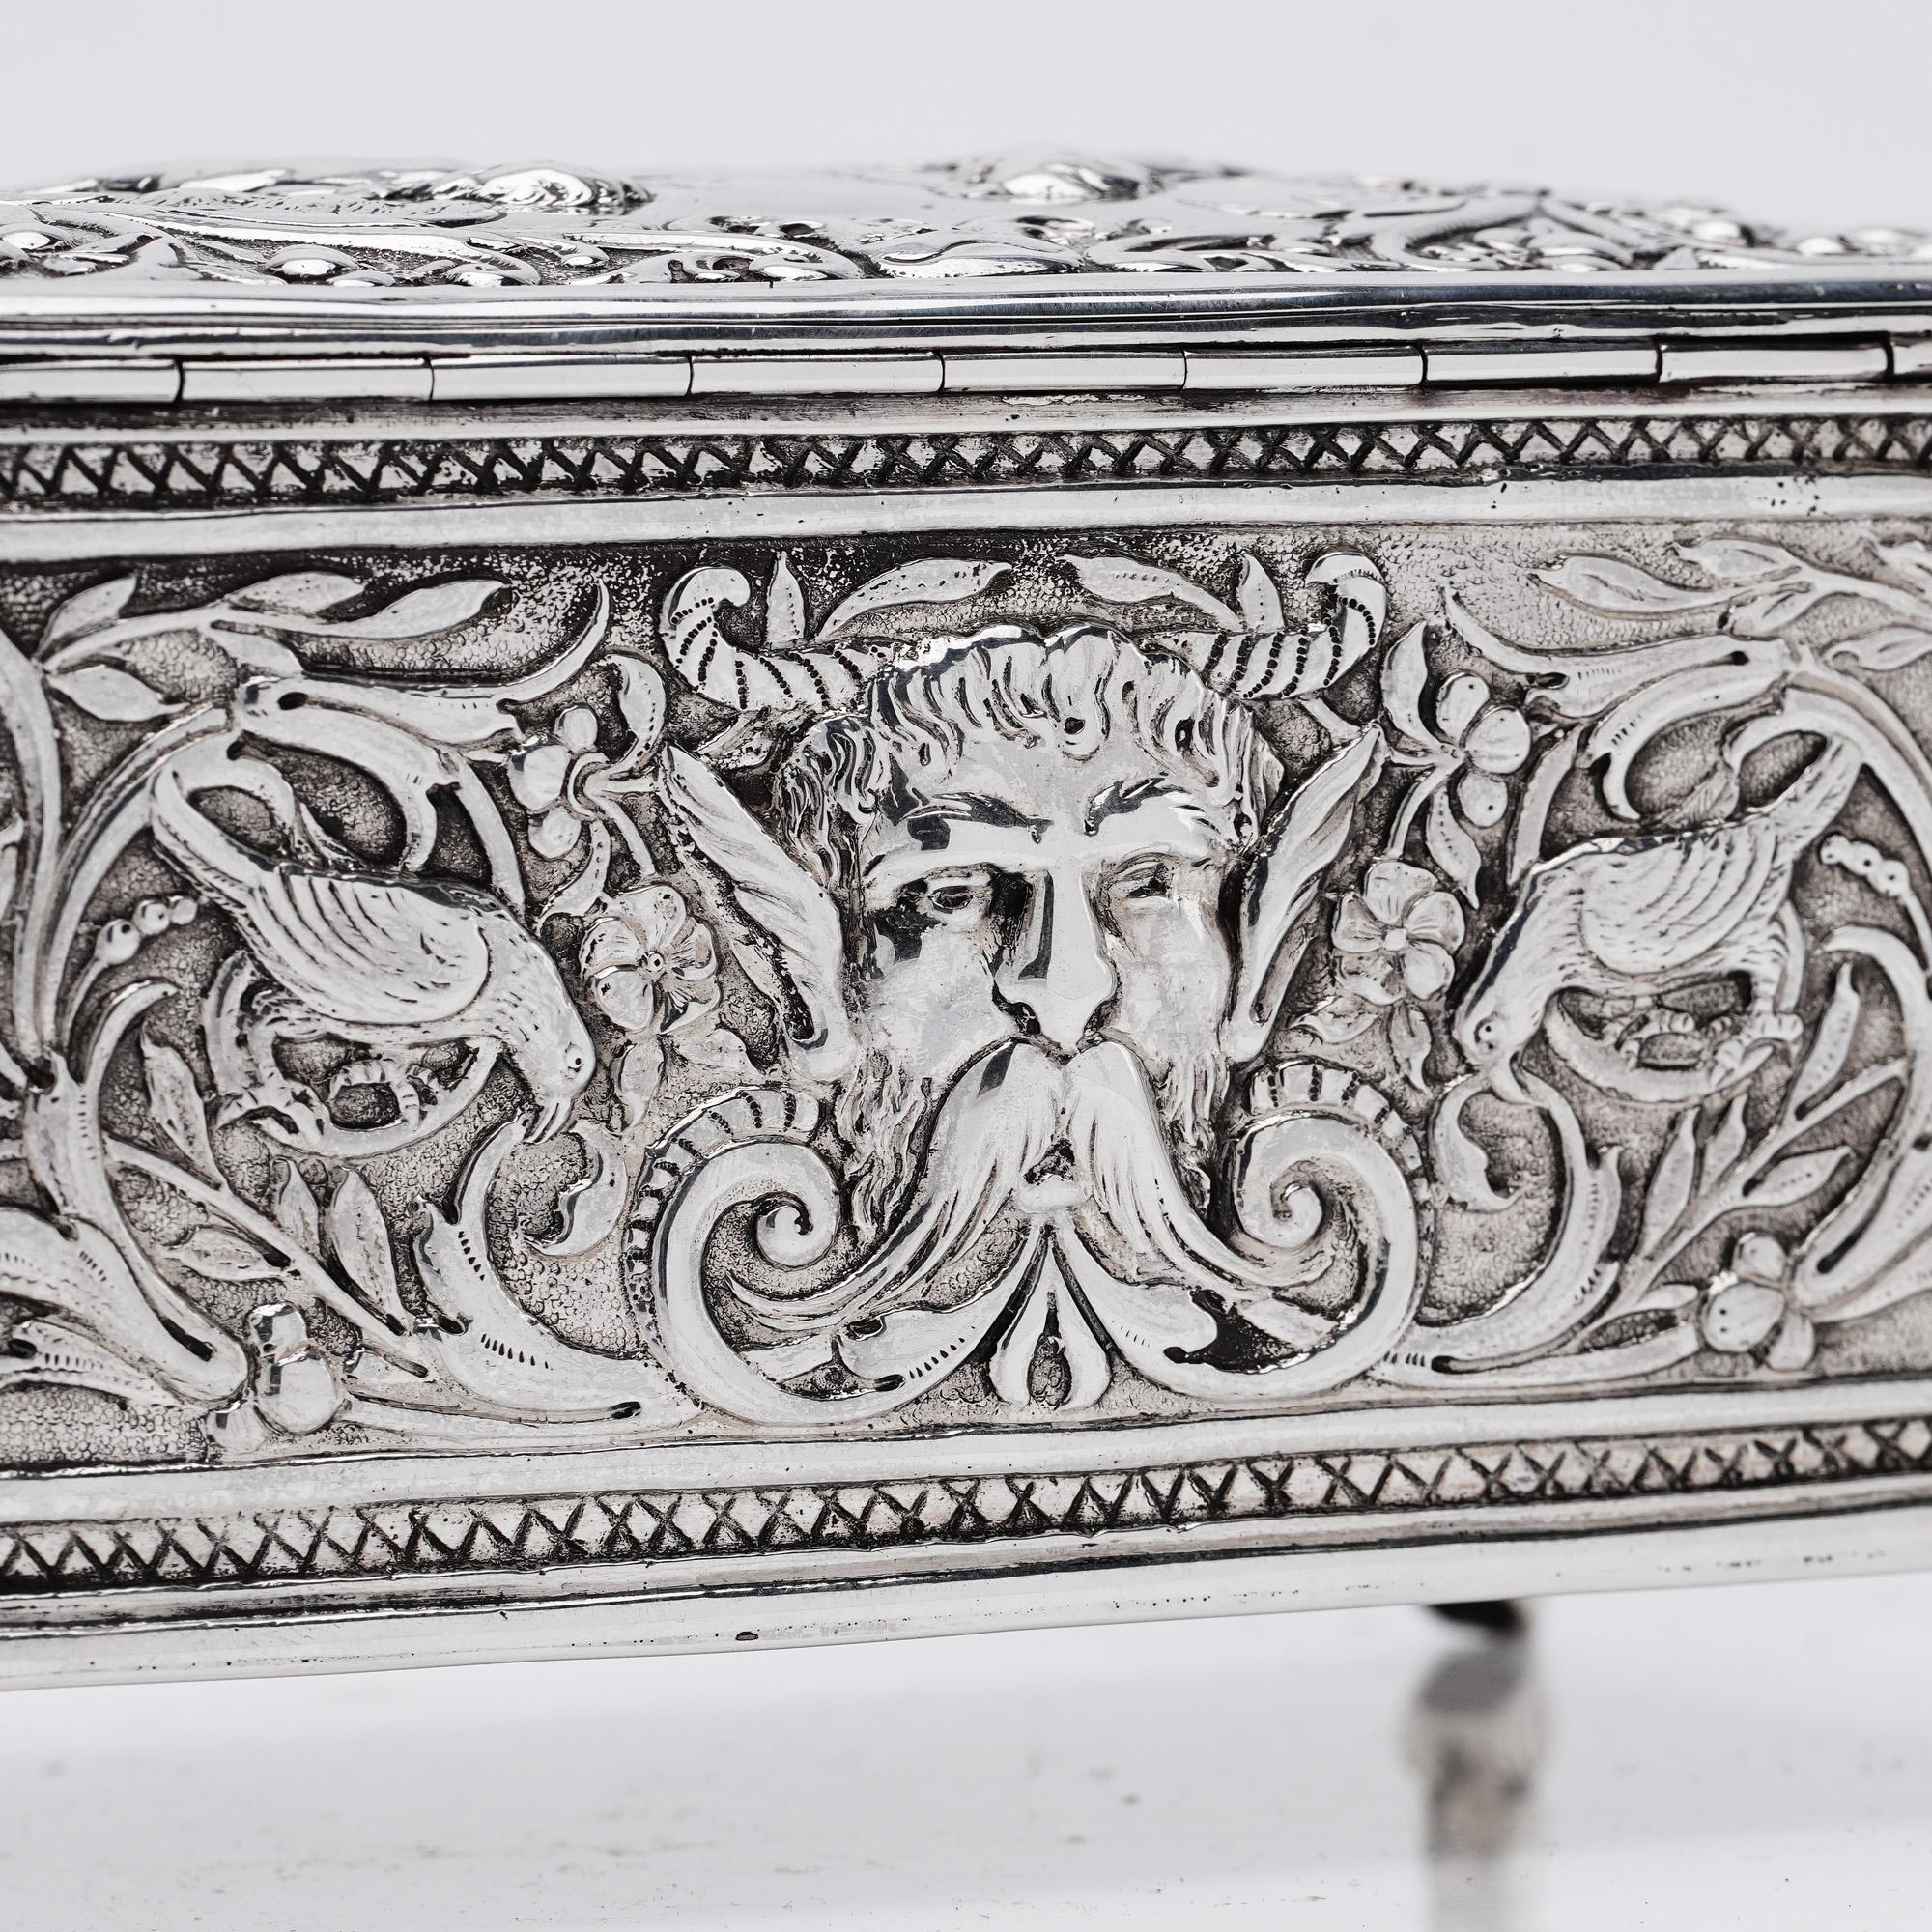 Antique Late 19th Century Silver Repoussé Decorated Jewellery Box with Cherubs For Sale 3